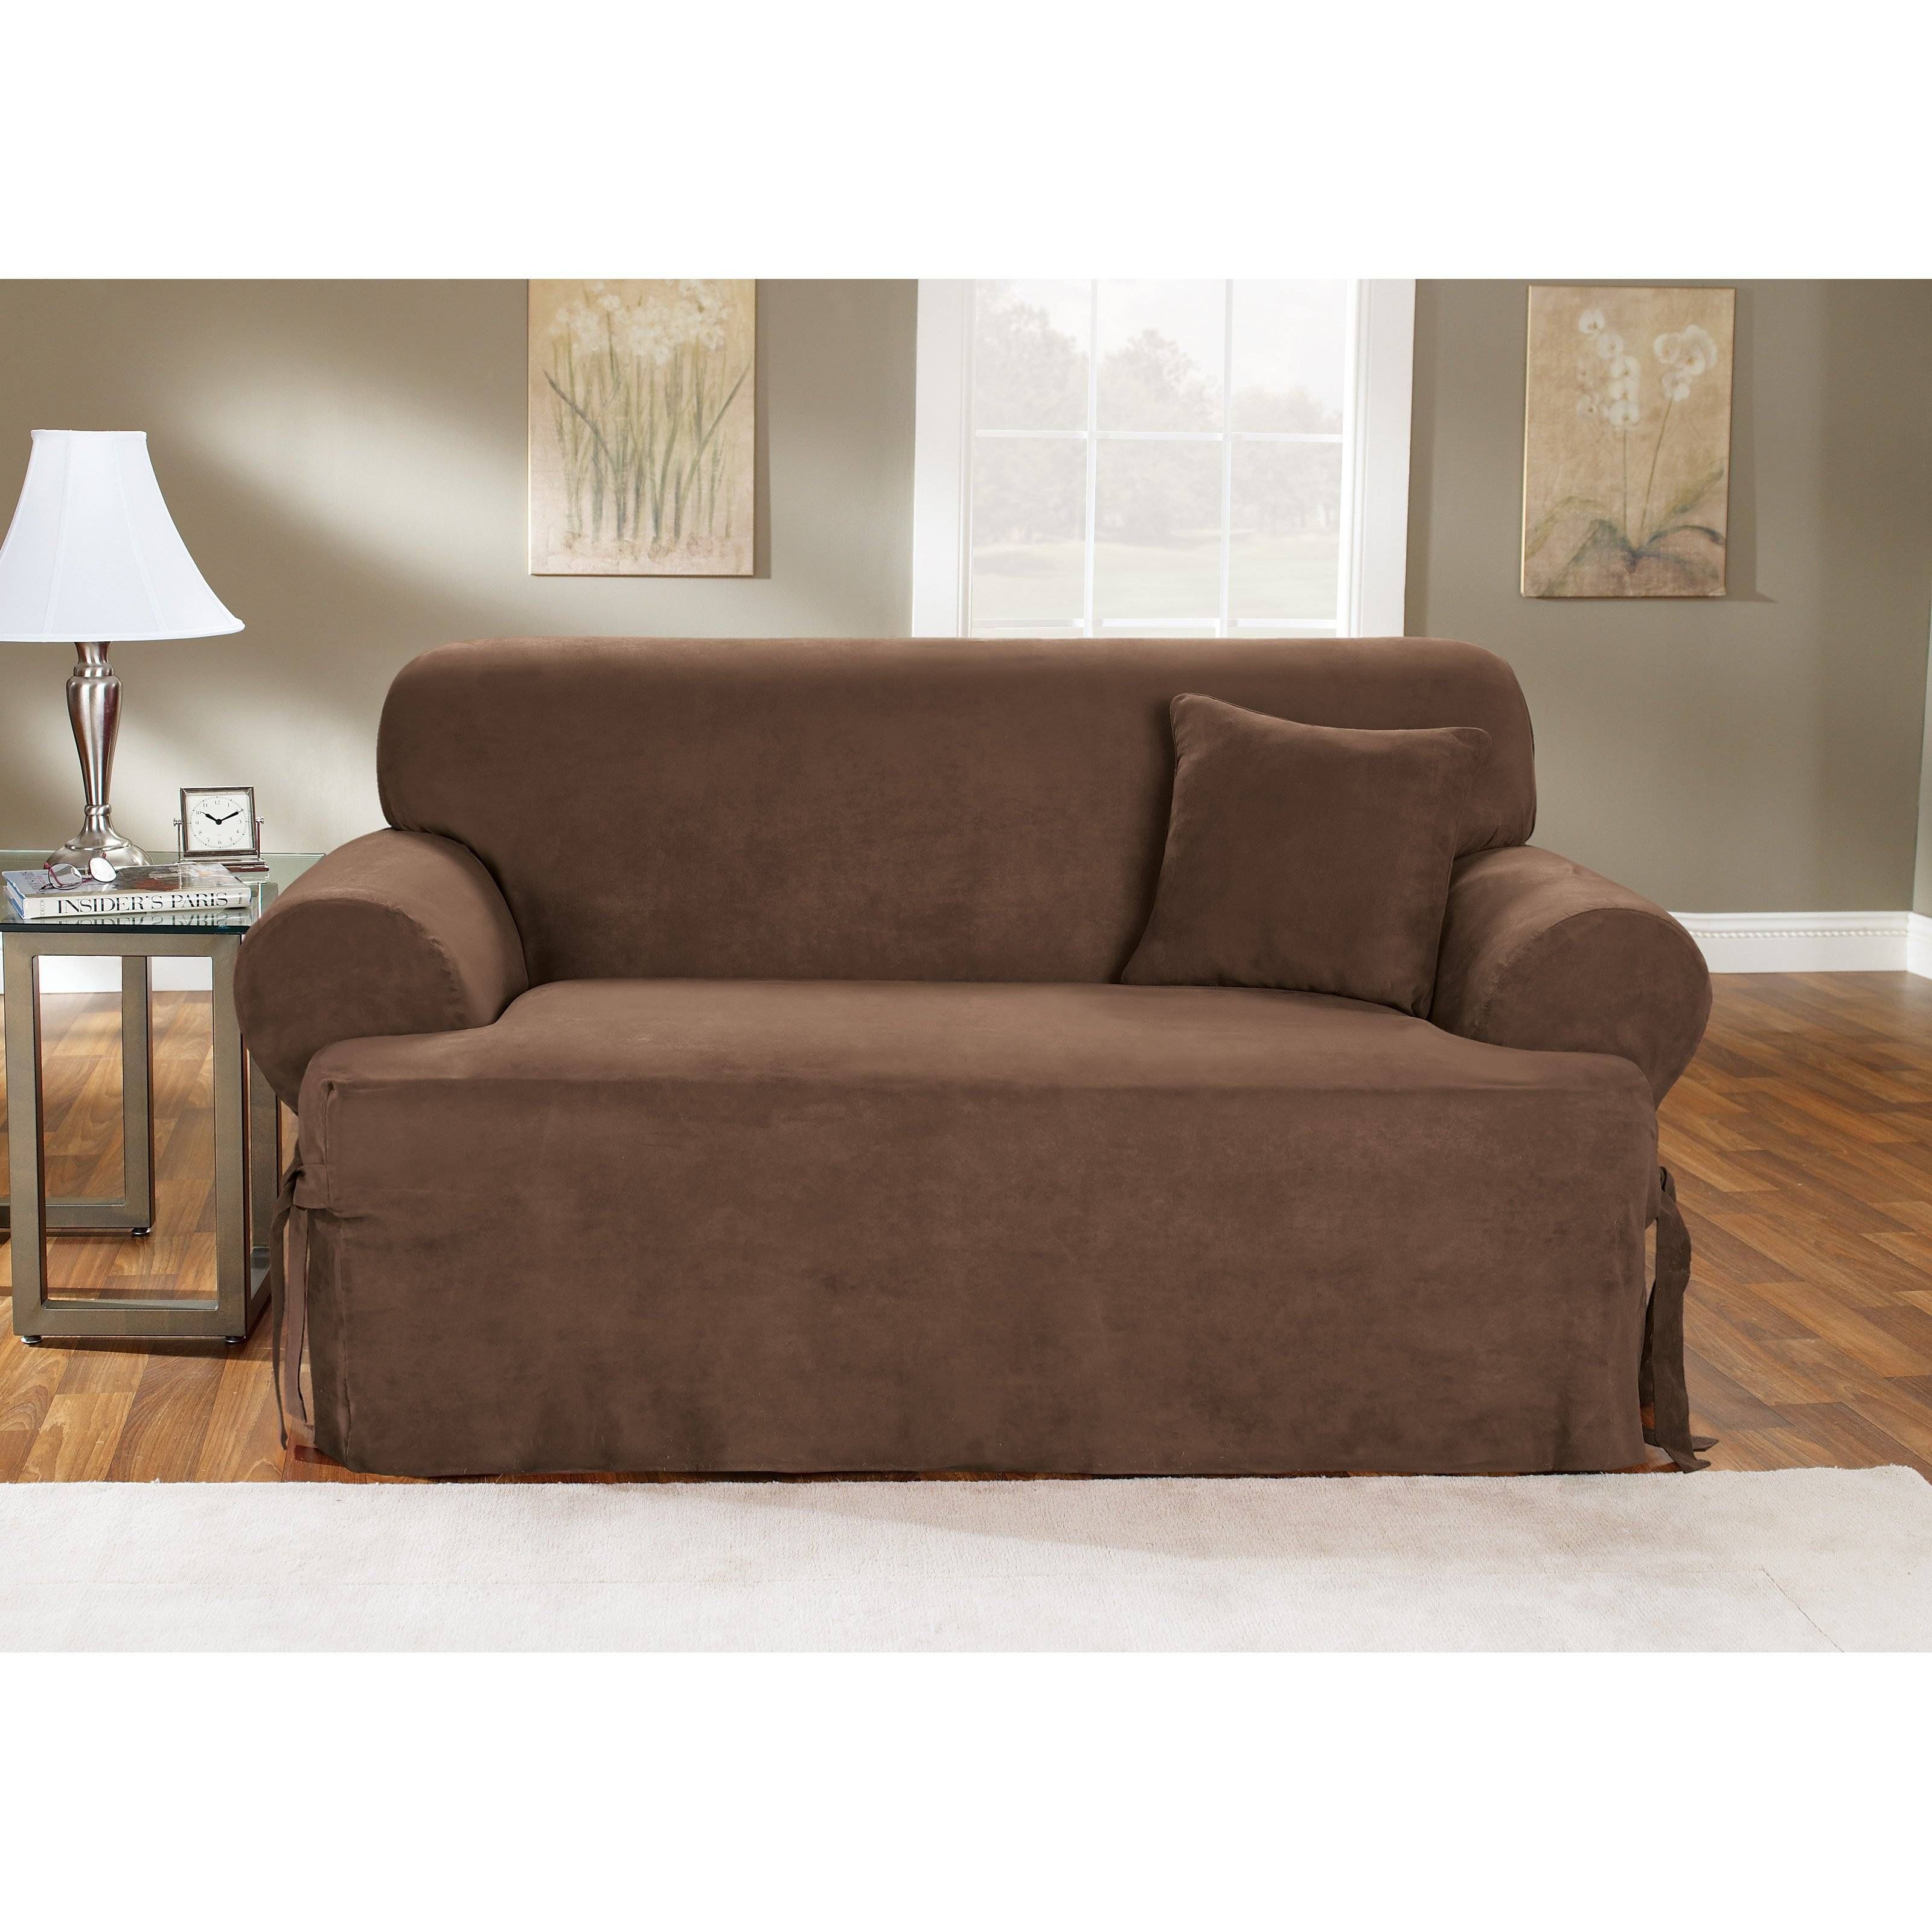 Sure Fit Soft Suede T Cushion Loveseat Slipcover – Walmart Intended For Suede Slipcovers For Sofas (View 4 of 15)